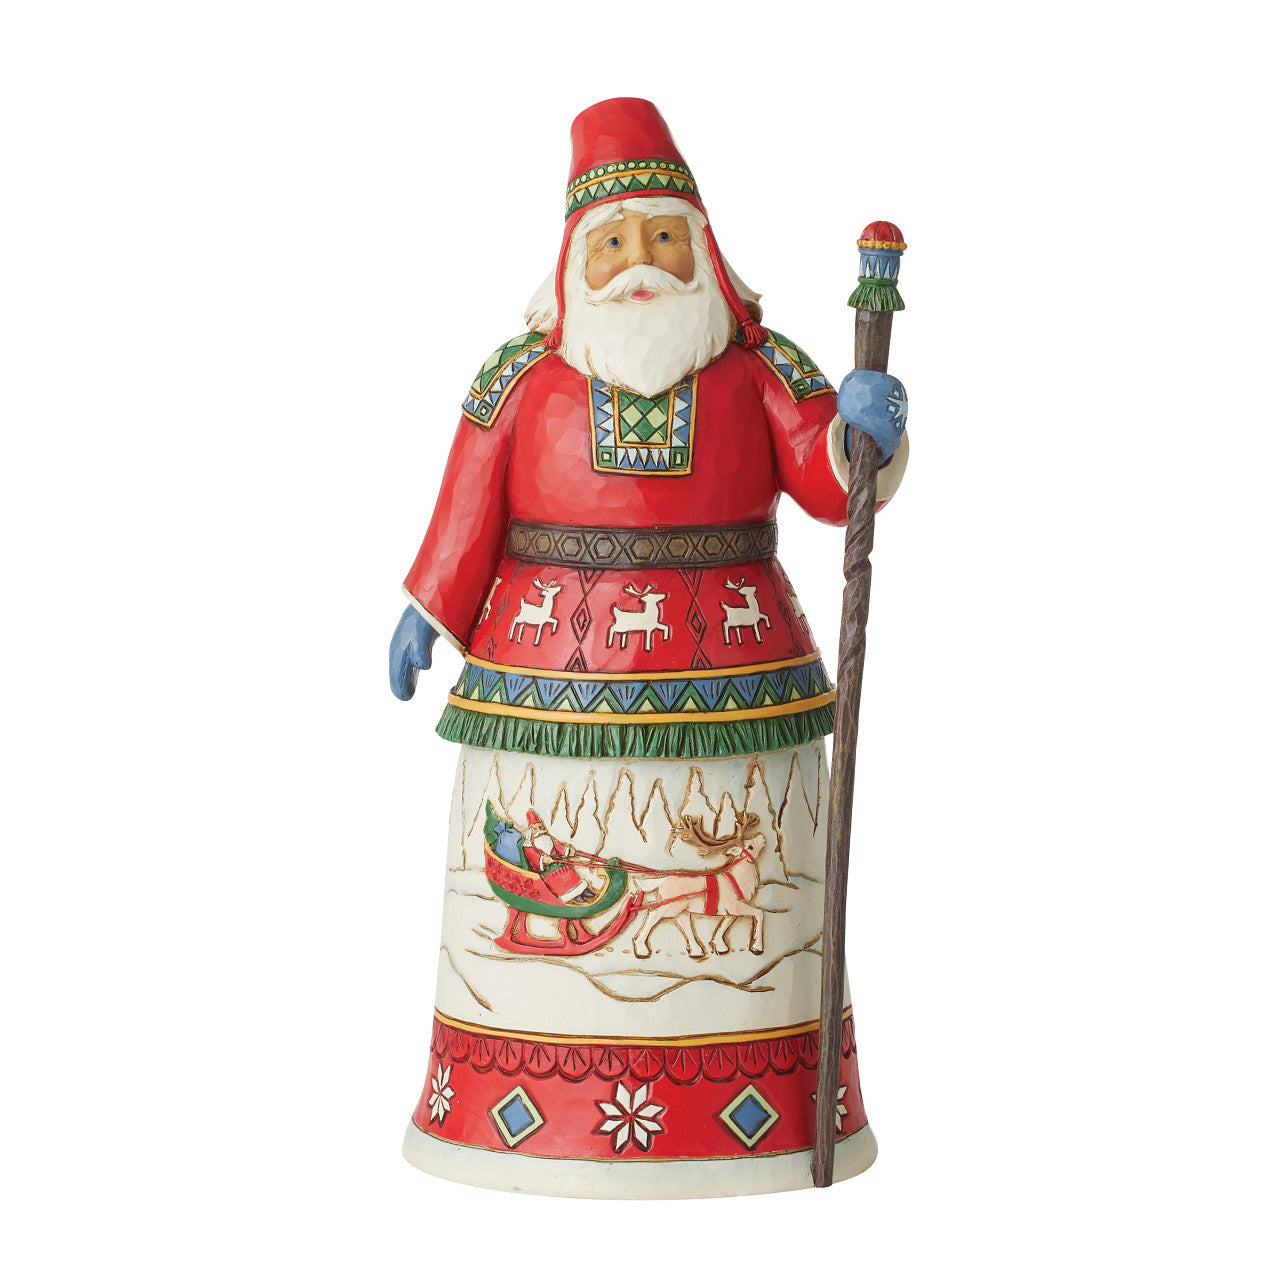 Father of the North - Lapland Santa With Cane Figurine